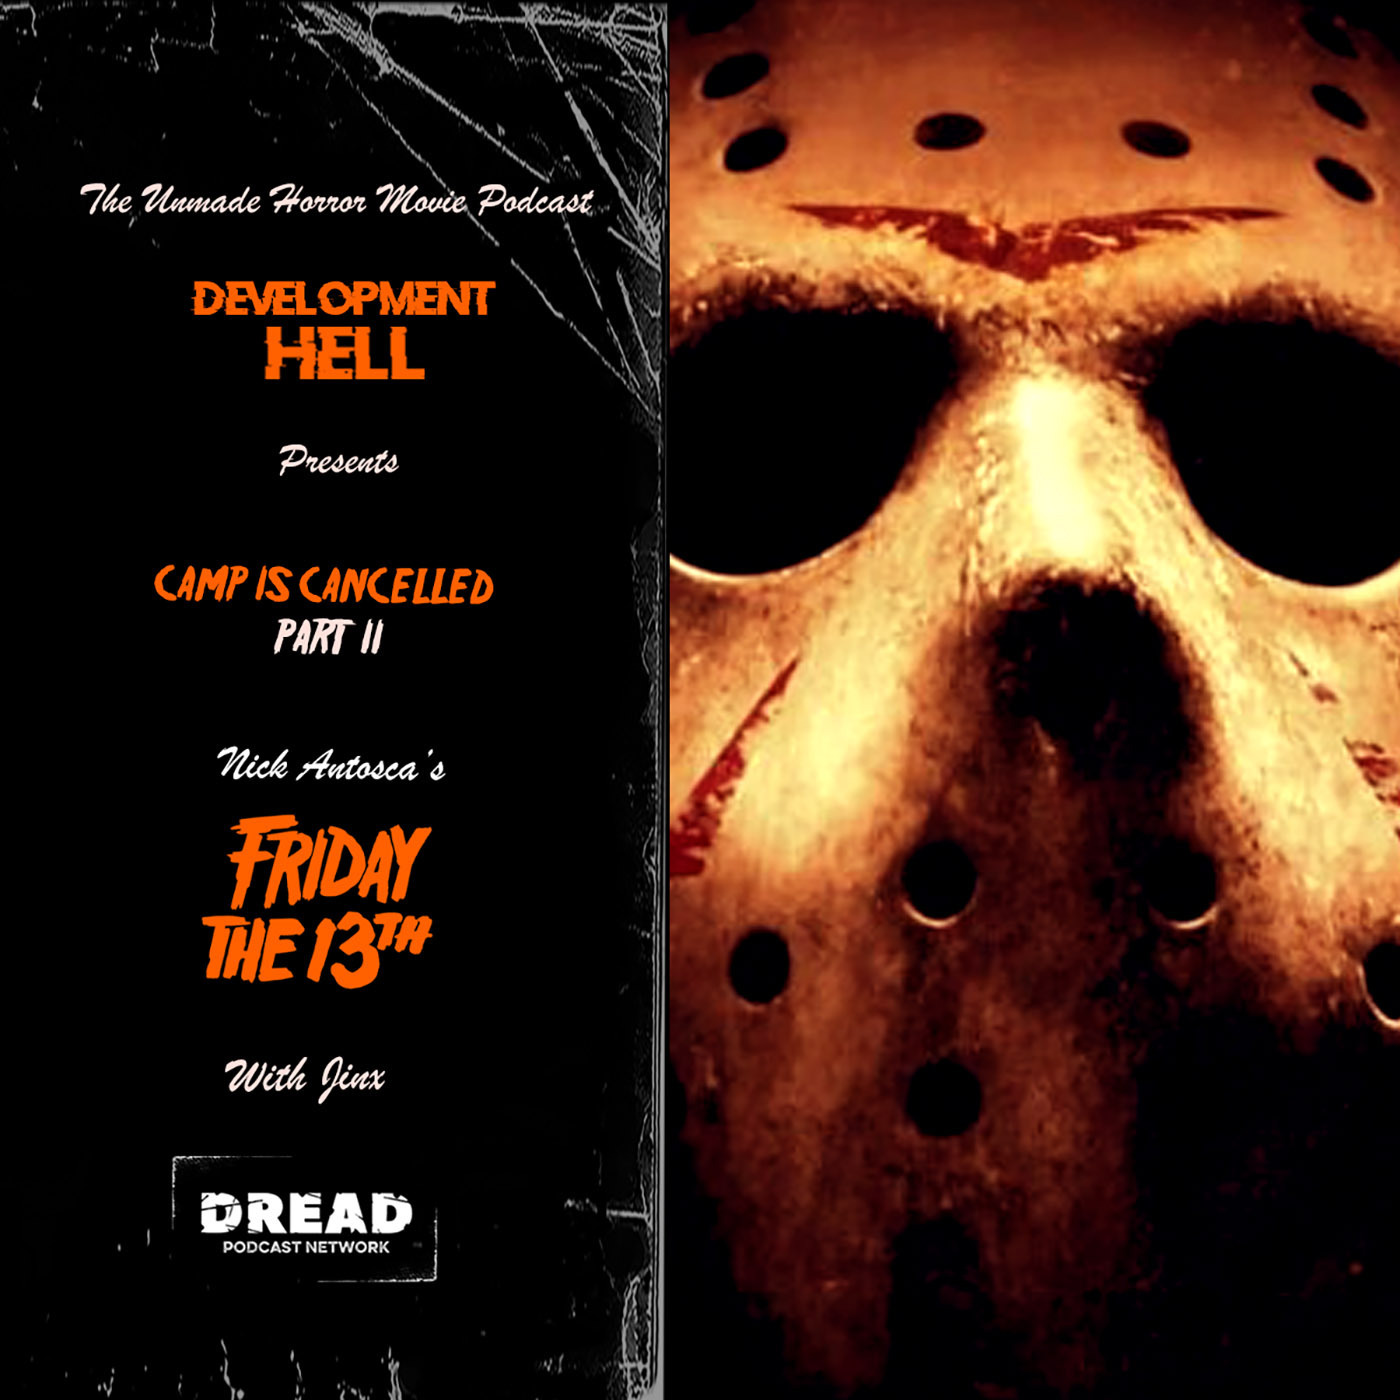 Nick Antosca’s FRIDAY THE 13TH [Camp is Cancelled Part II]